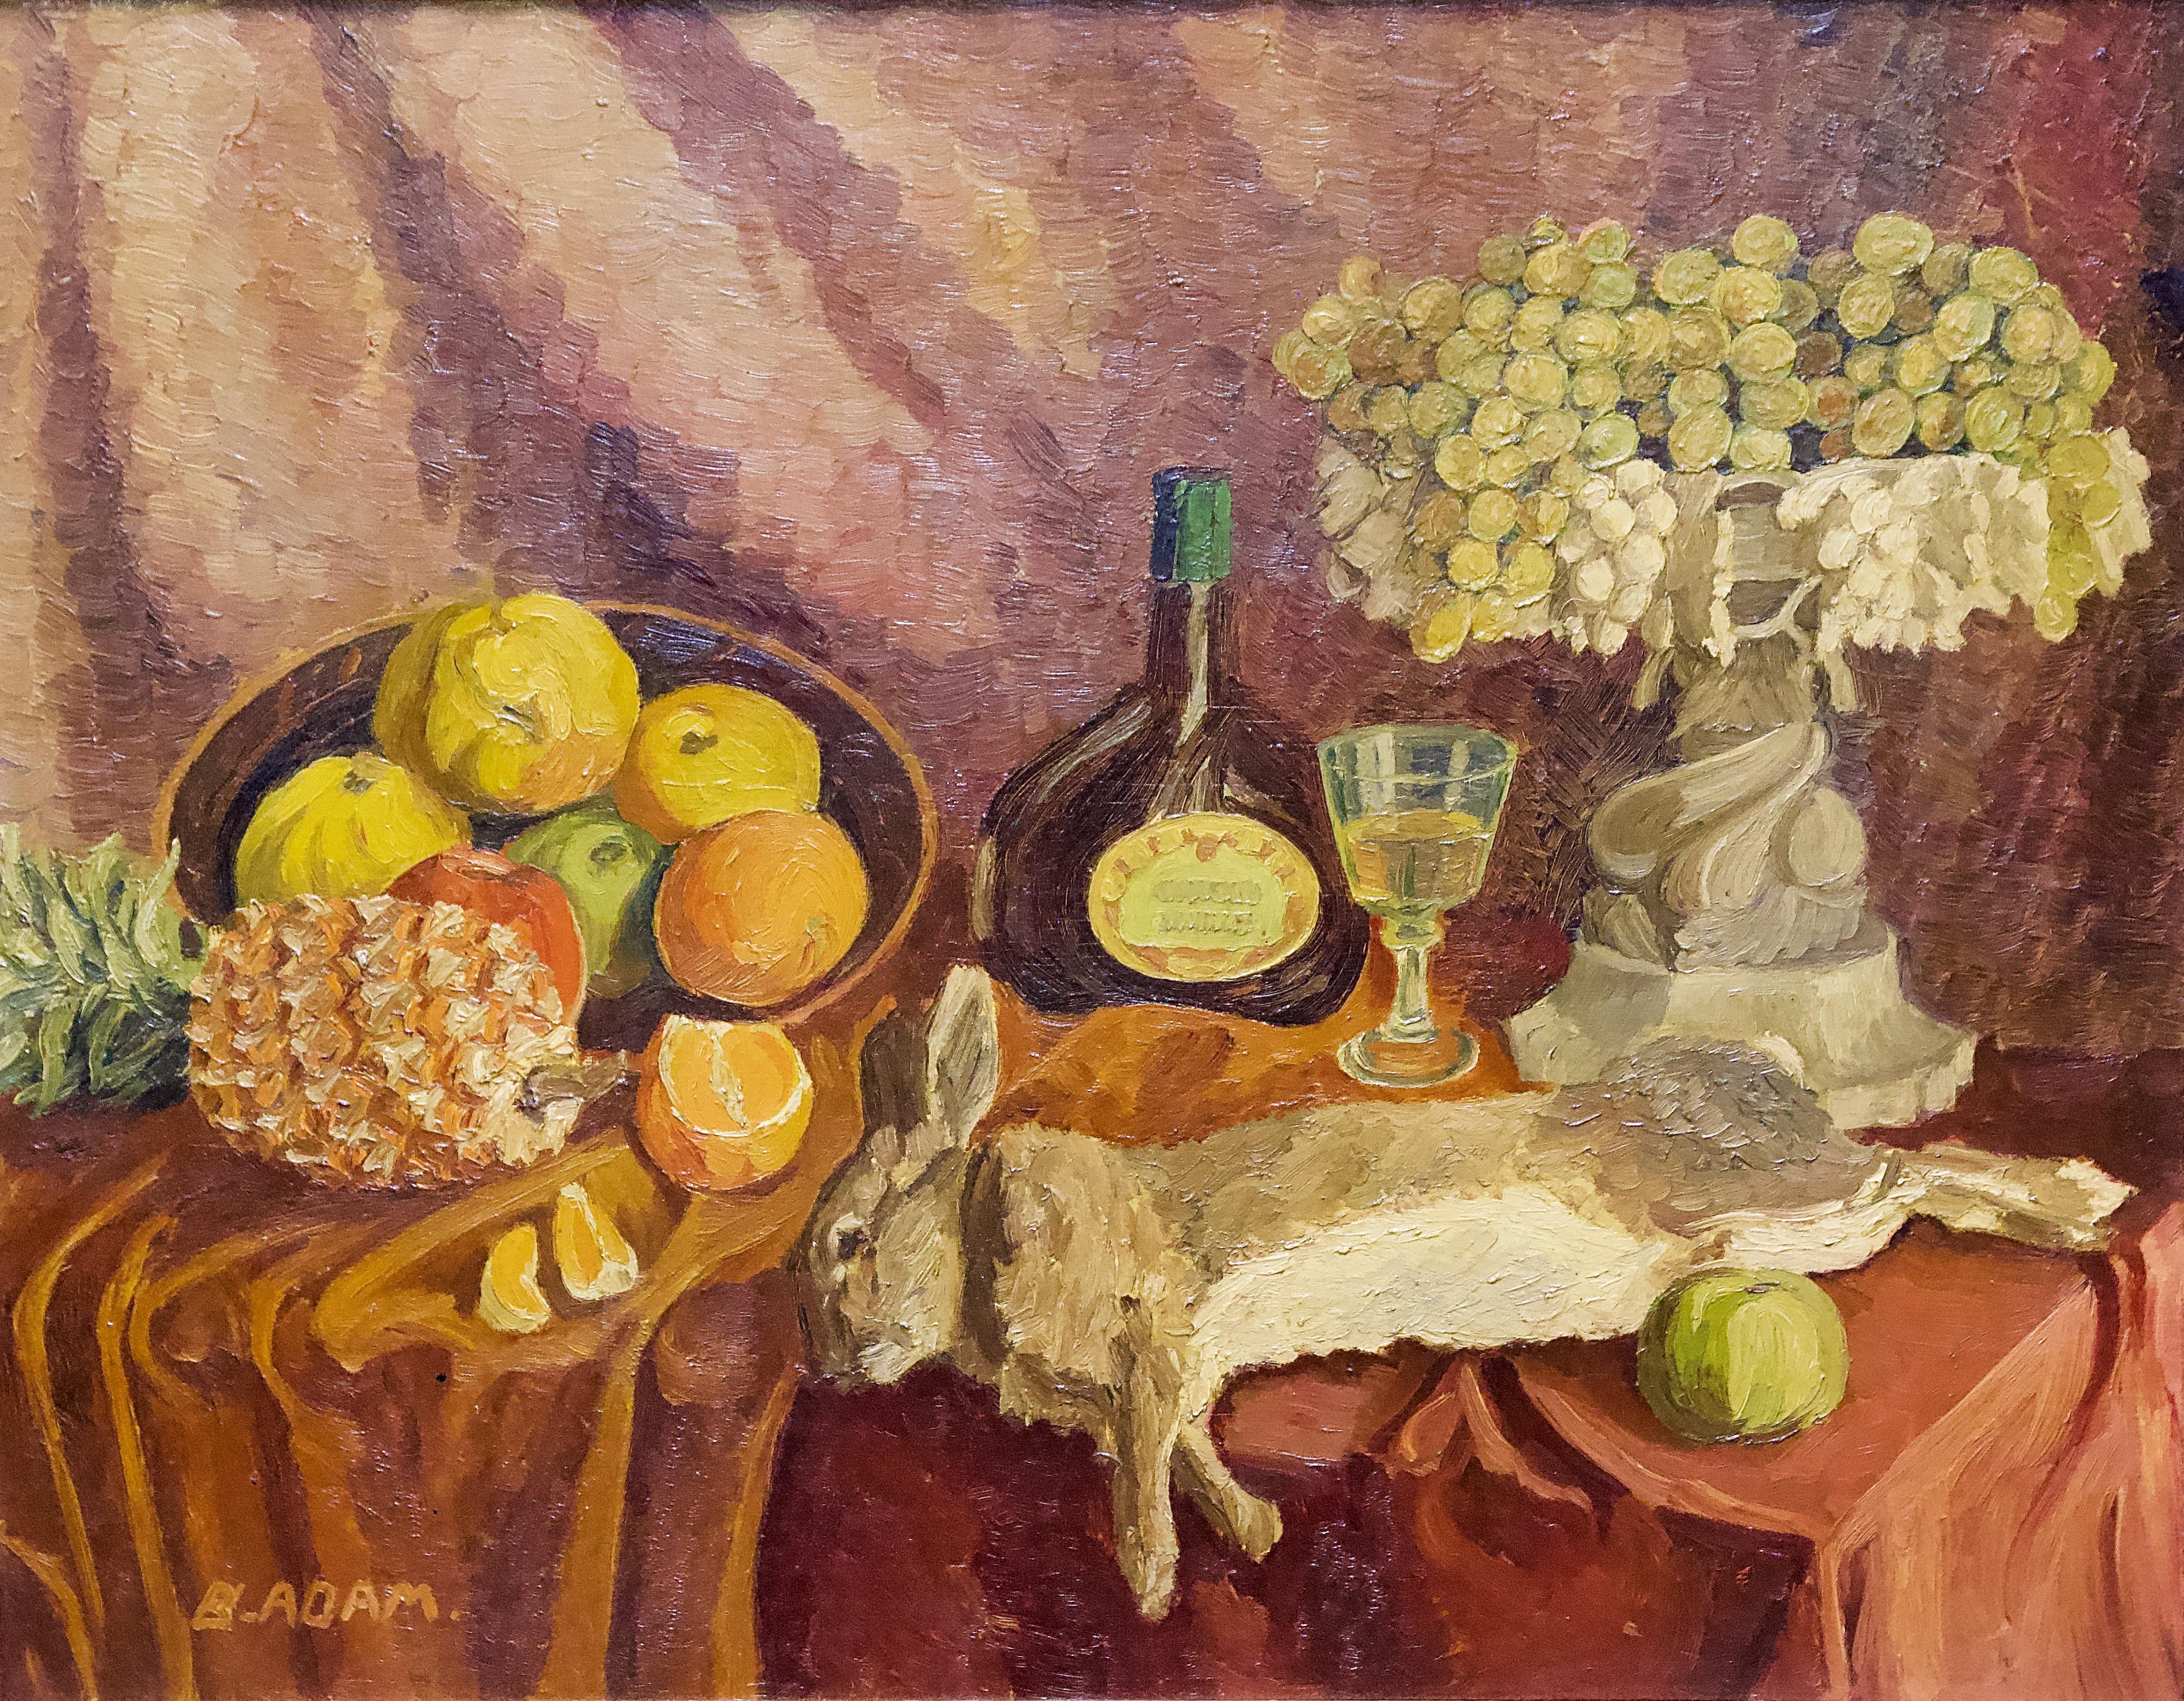 B. Adam Still-Life Painting - Antique Painting, Hunting Still Life, impressionist style. Oil on wood.